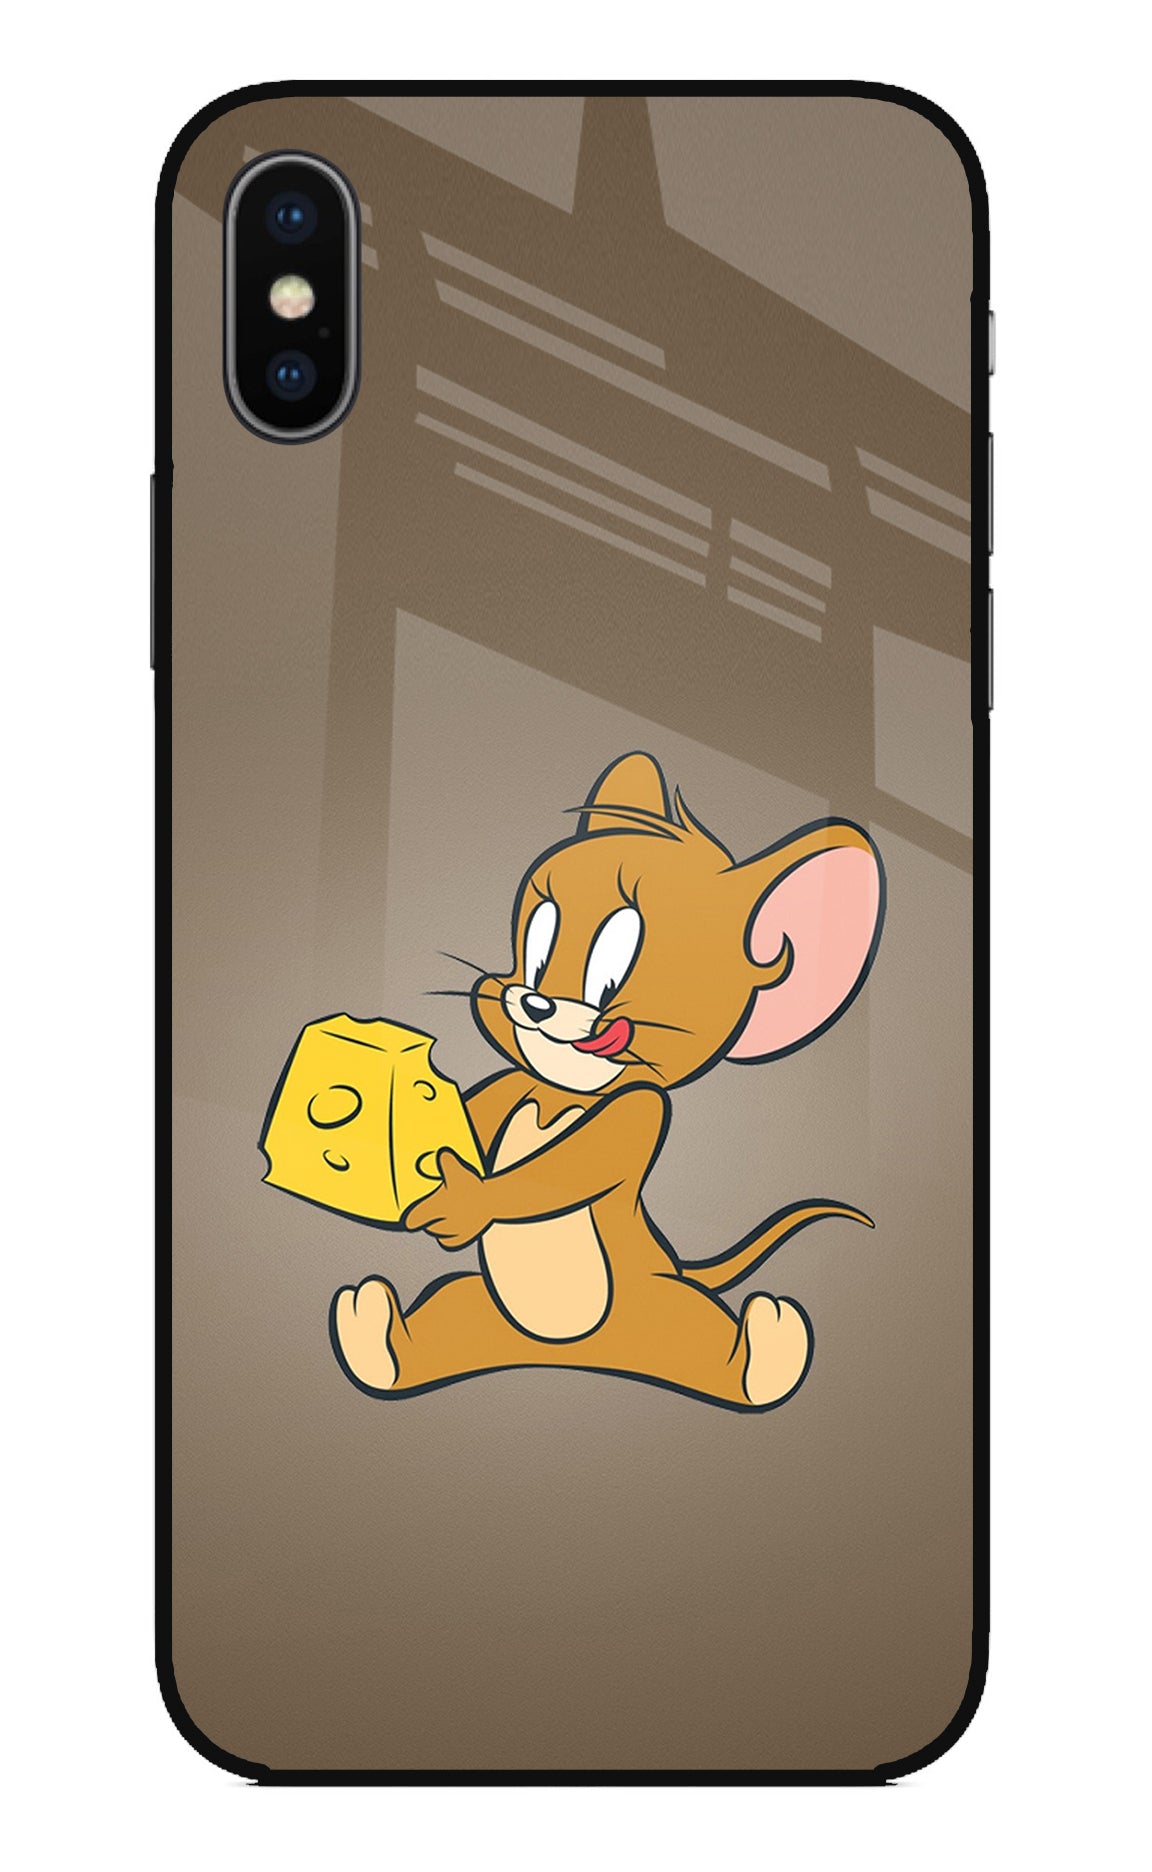 Jerry iPhone XS Back Cover